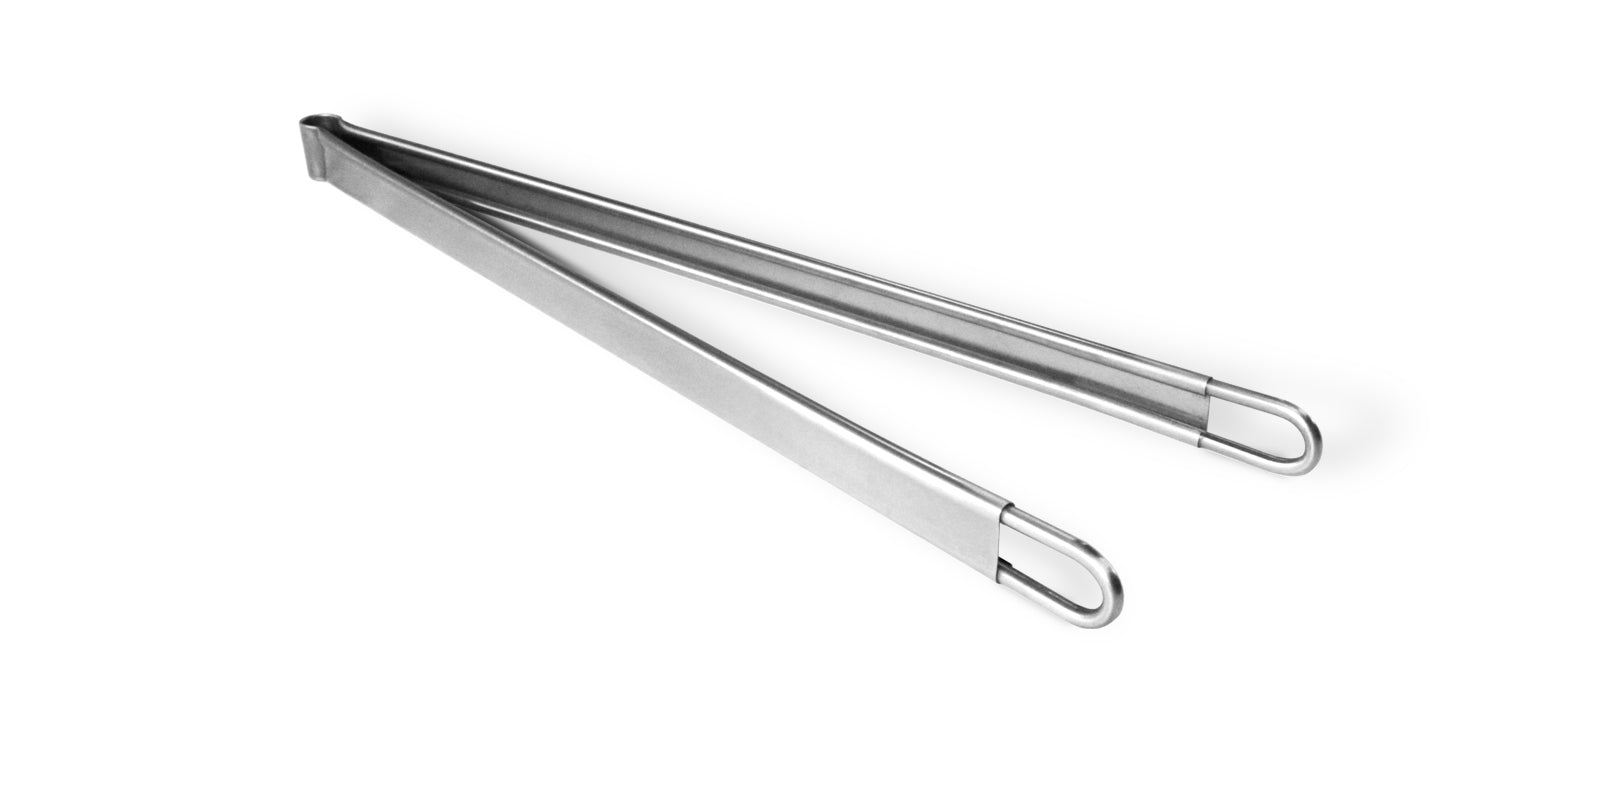 myGRILL Stainless Steel Charcoal Tongs - Made in Cyprus (Extra Heavy Duty) - 950010-26500000